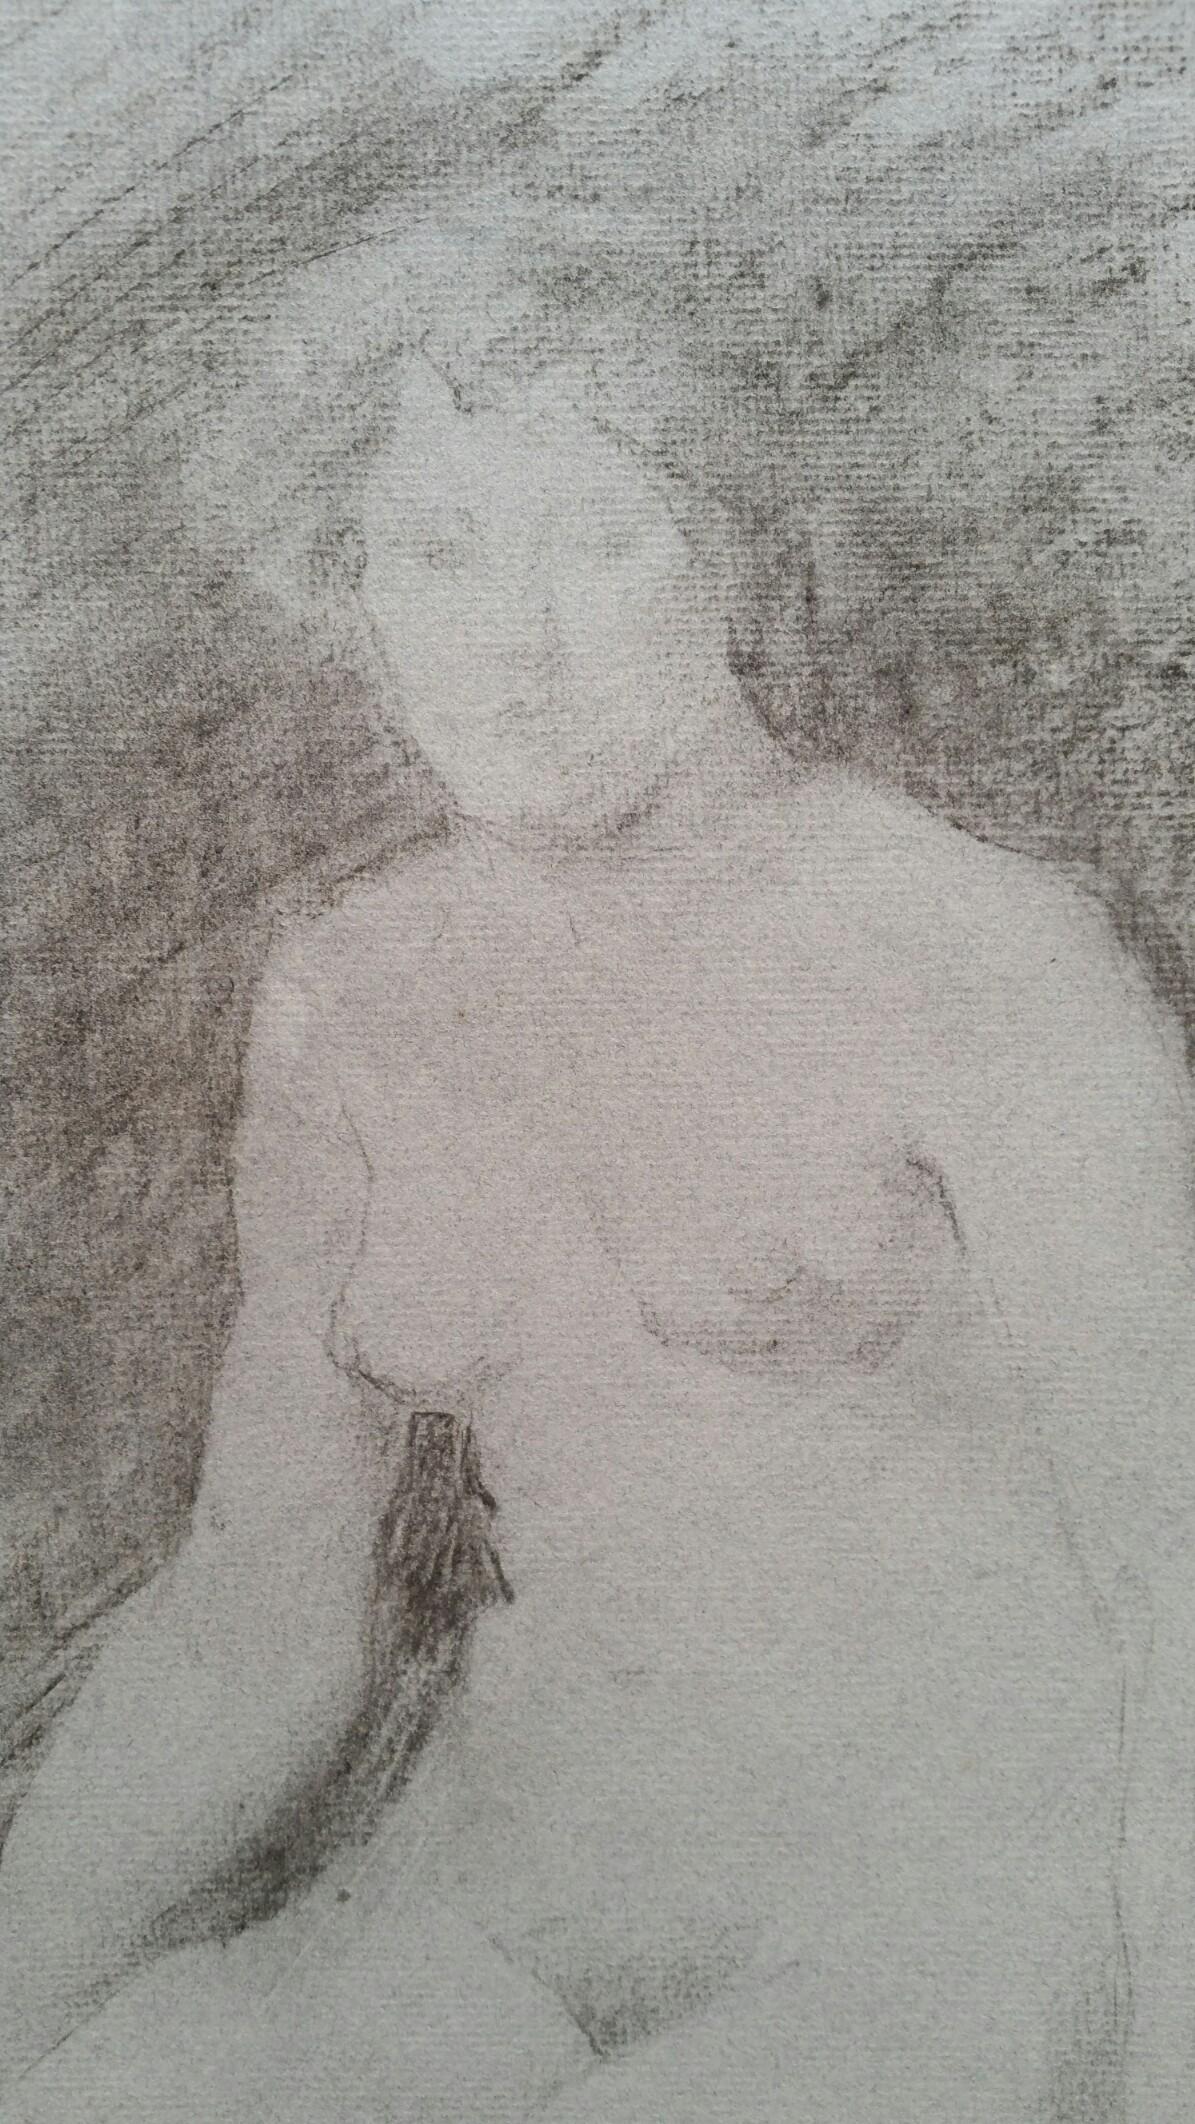 English Graphite Sketch of a Female Nude, Seated
by Henry George Moon (British 1857-1905)
on pale grey artists paper, unframed
measurements: sheet 18.75 x 10.25 inches (width measured at narrowest point of sheet)

provenance: from the artists